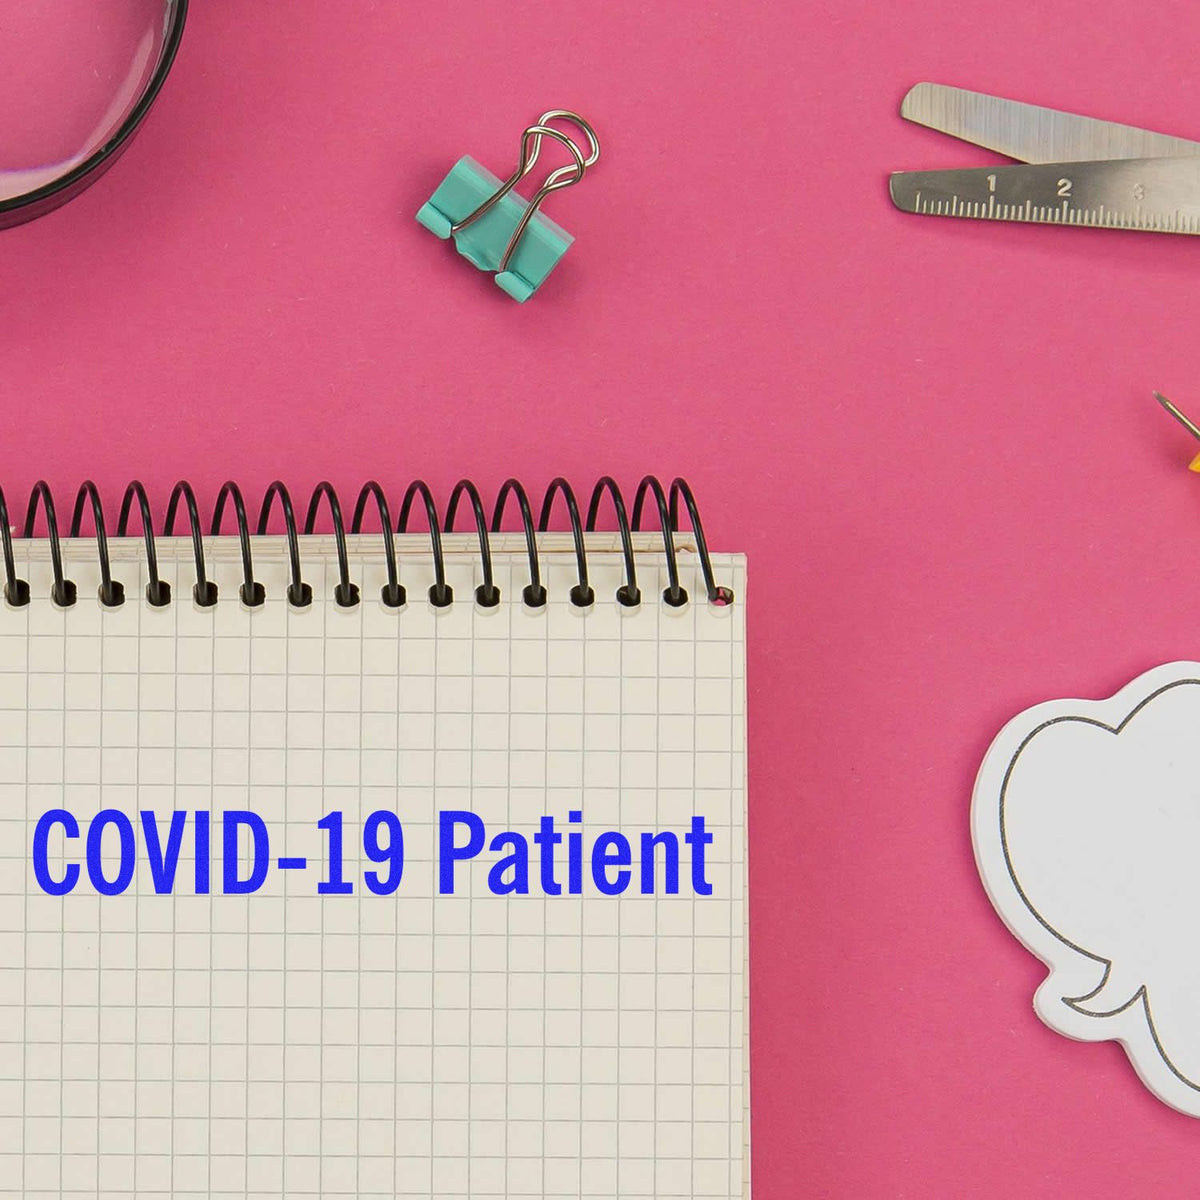 Large Pre-Inked Covid-19 Patient Stamp In Use Photo